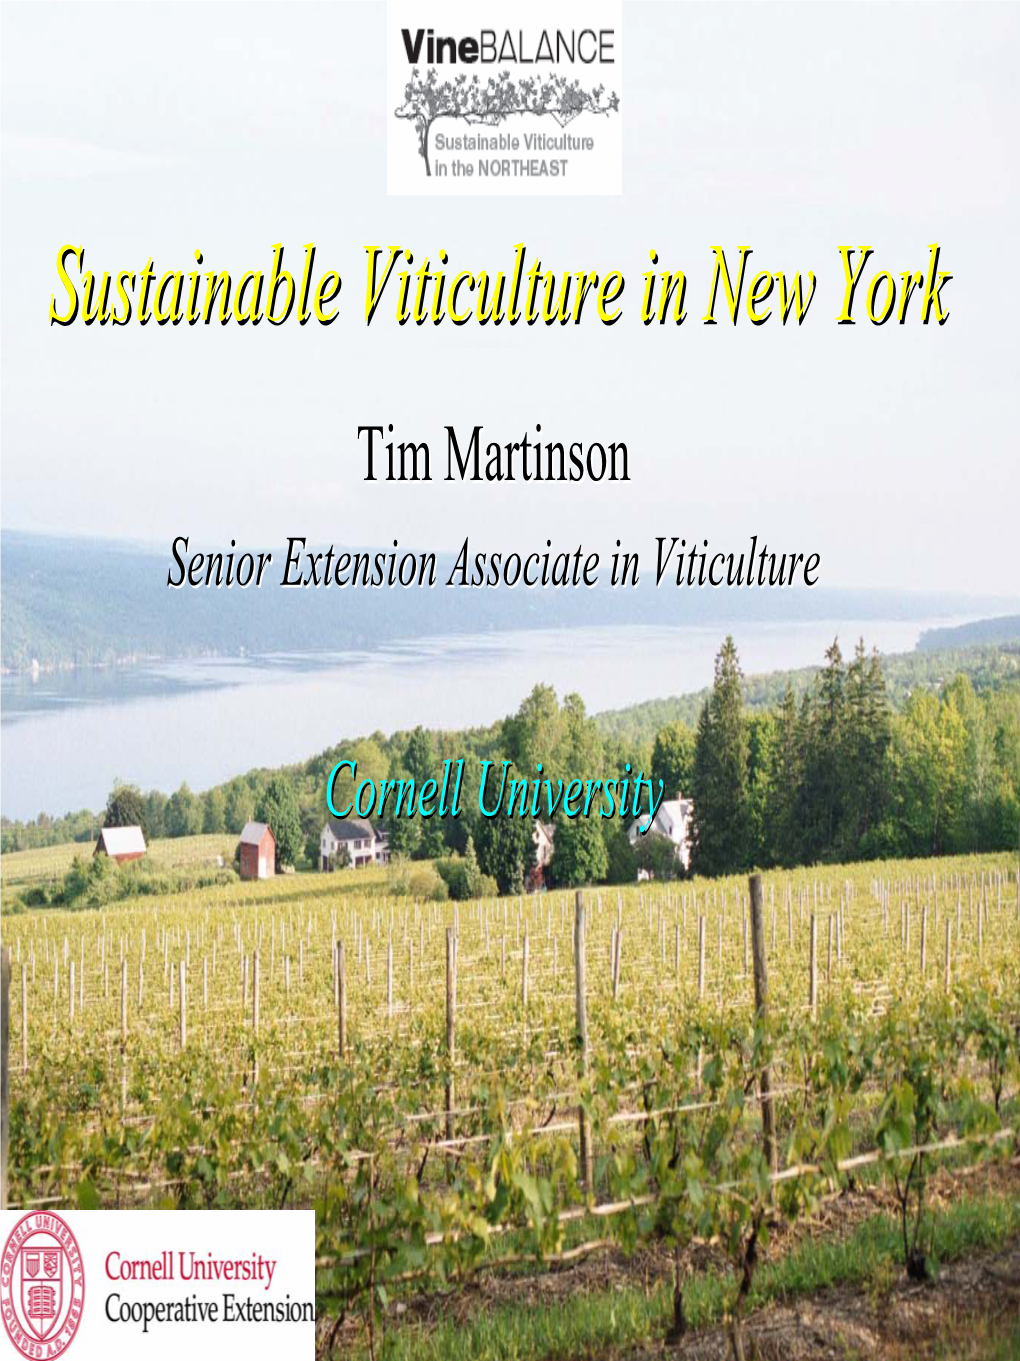 Developing Sustainable Viticulture Guidelines for NY/PA